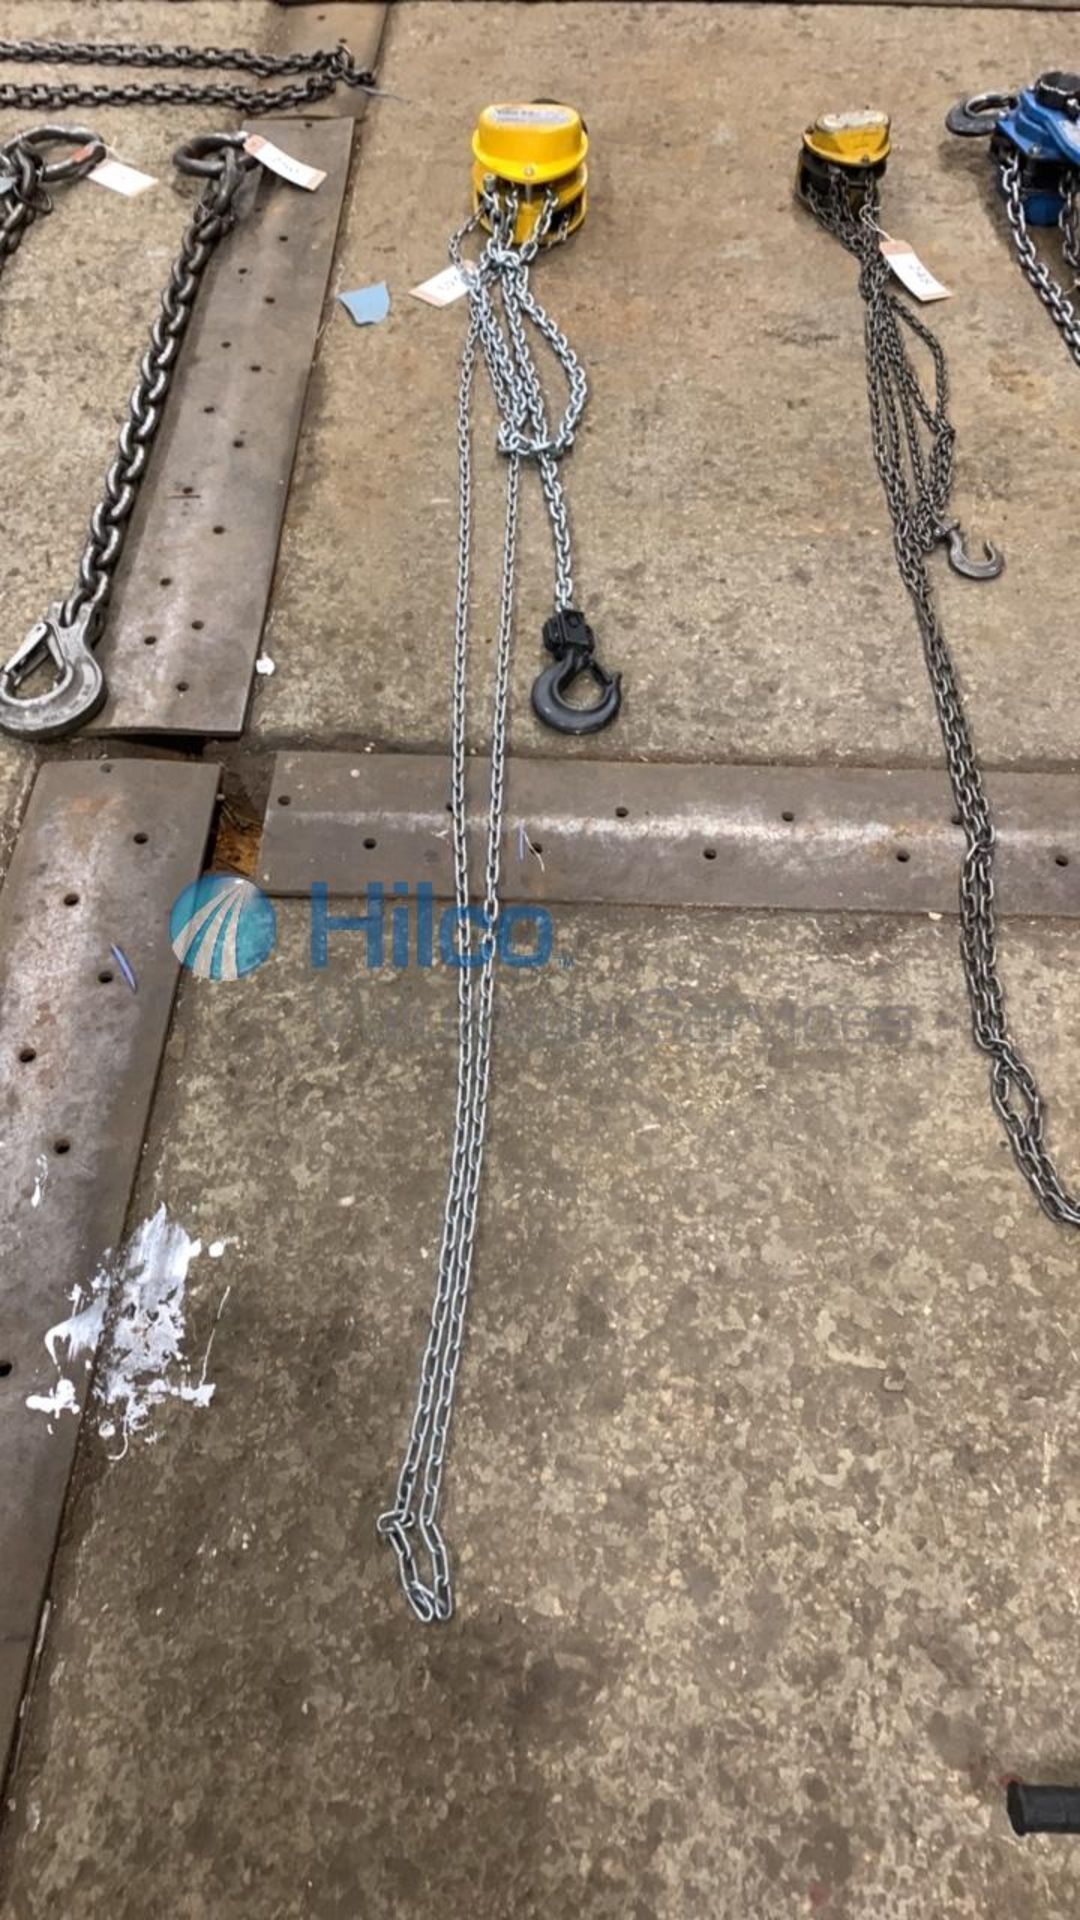 Yale 2000kg Manual Chain Hoist, Serial No S20031396X (2020) - Image 3 of 3